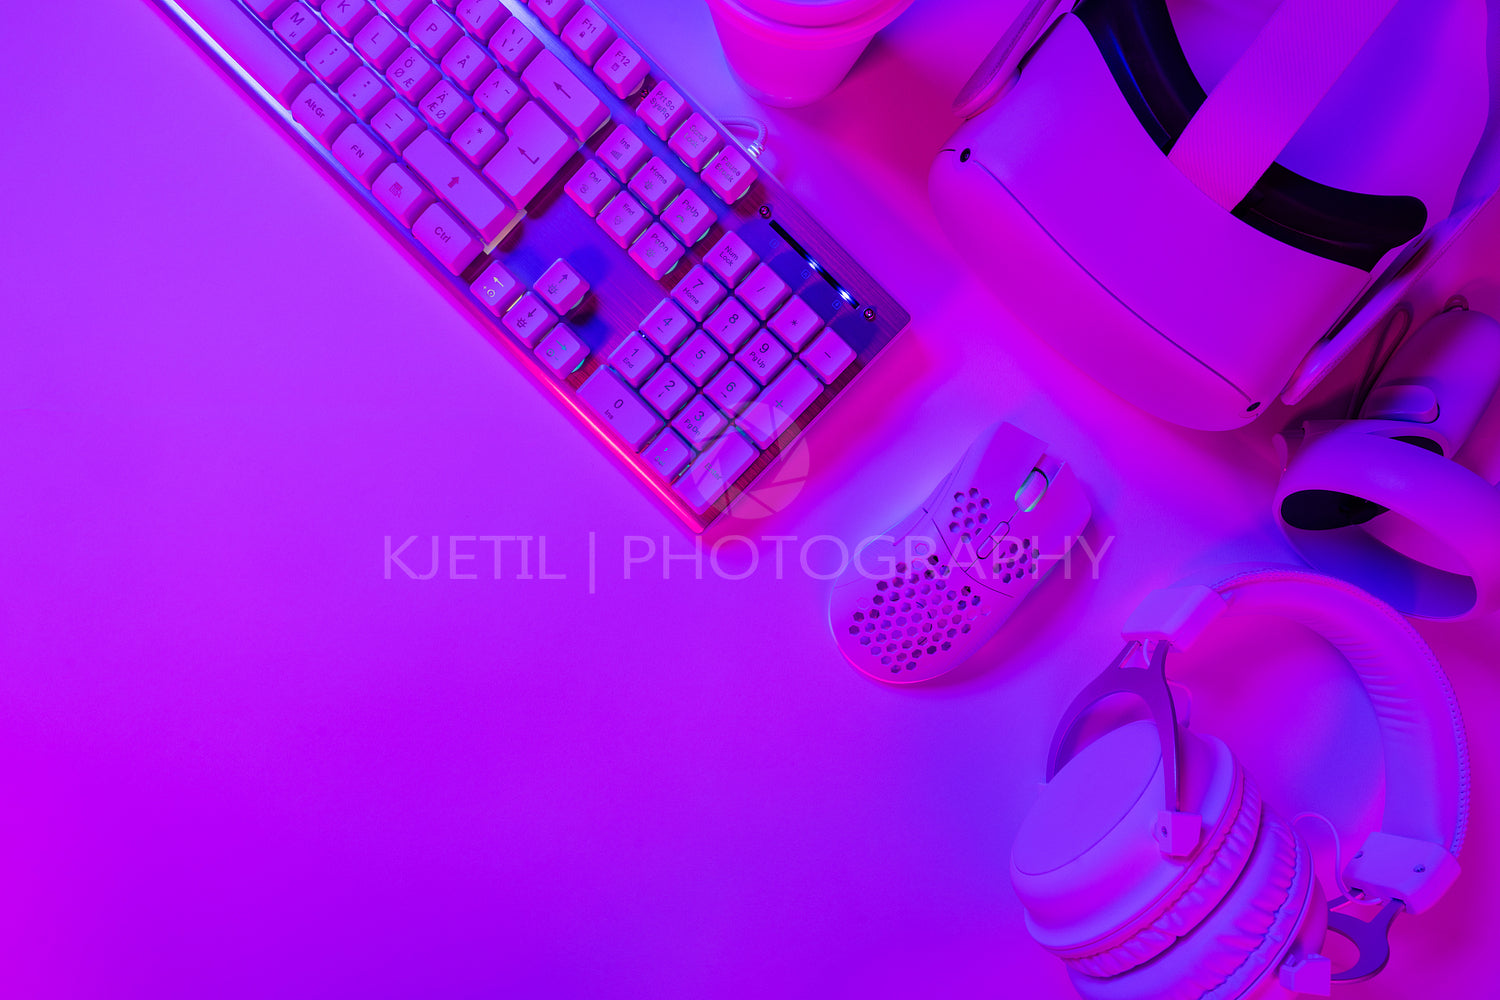 Keyboard with mouse and headphones on gaming desk